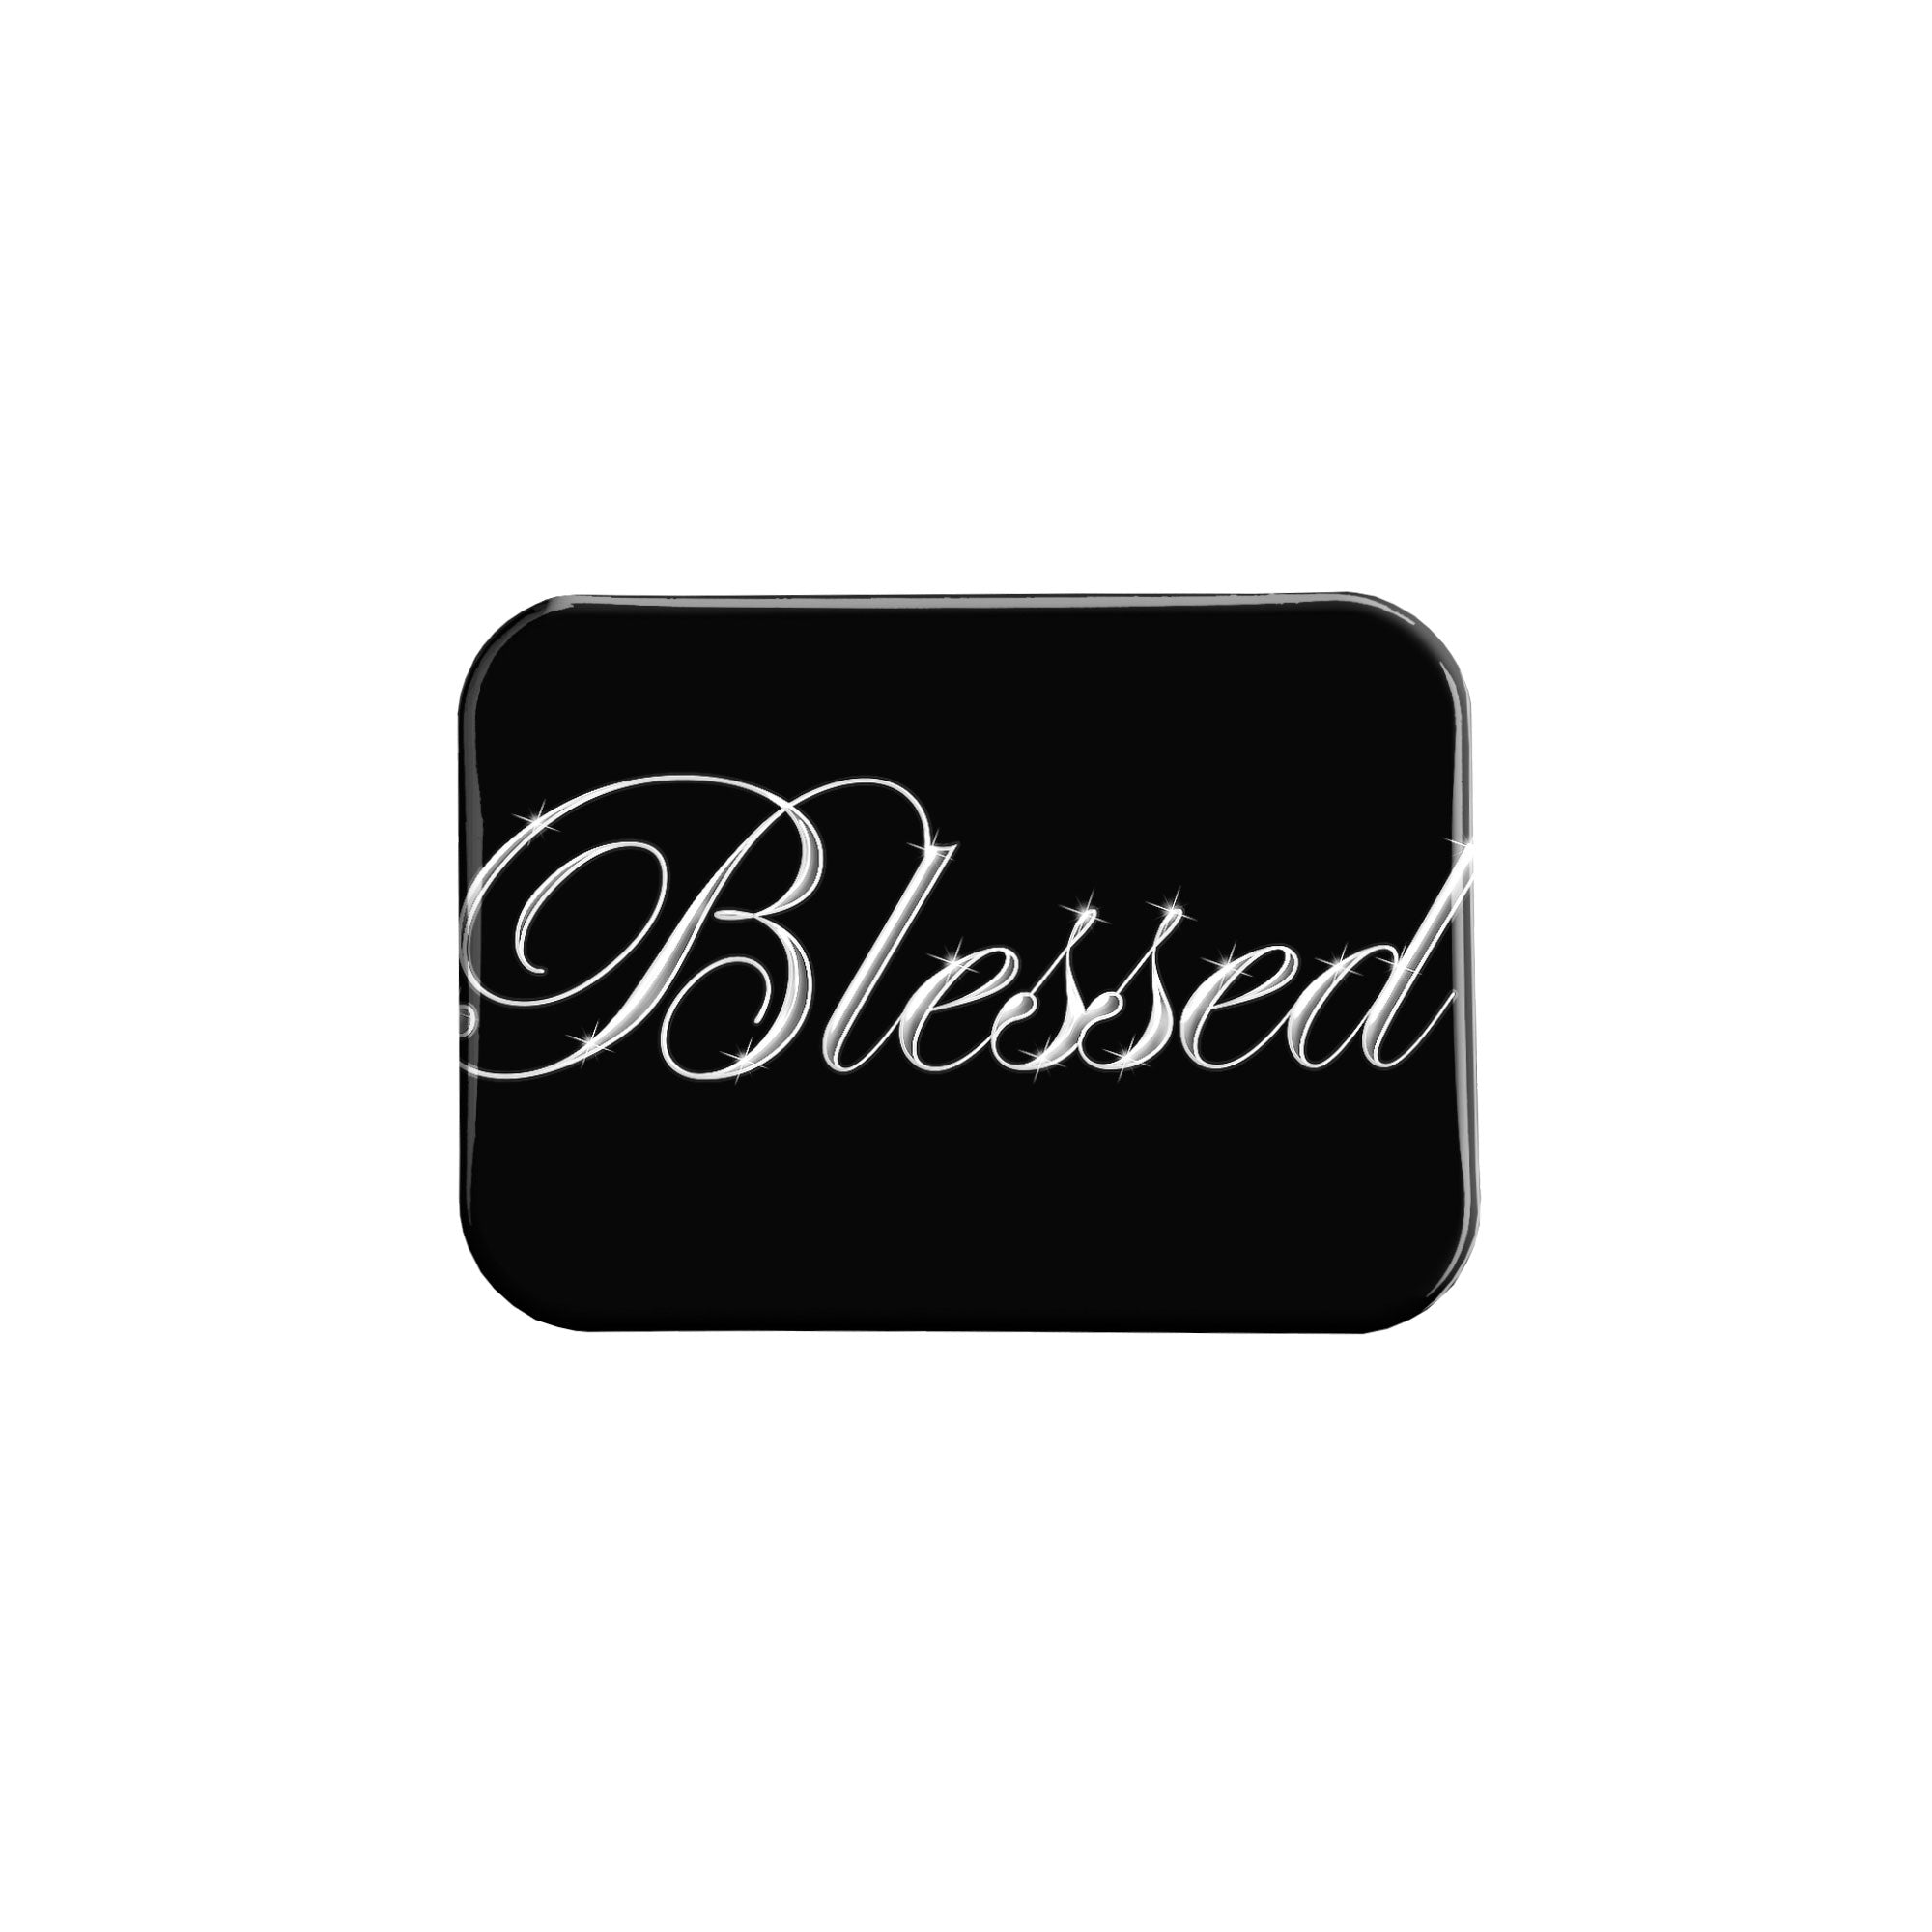 "Blessed in Silver" - 2.5" X 3.5" Rectangle Fridge Magnets